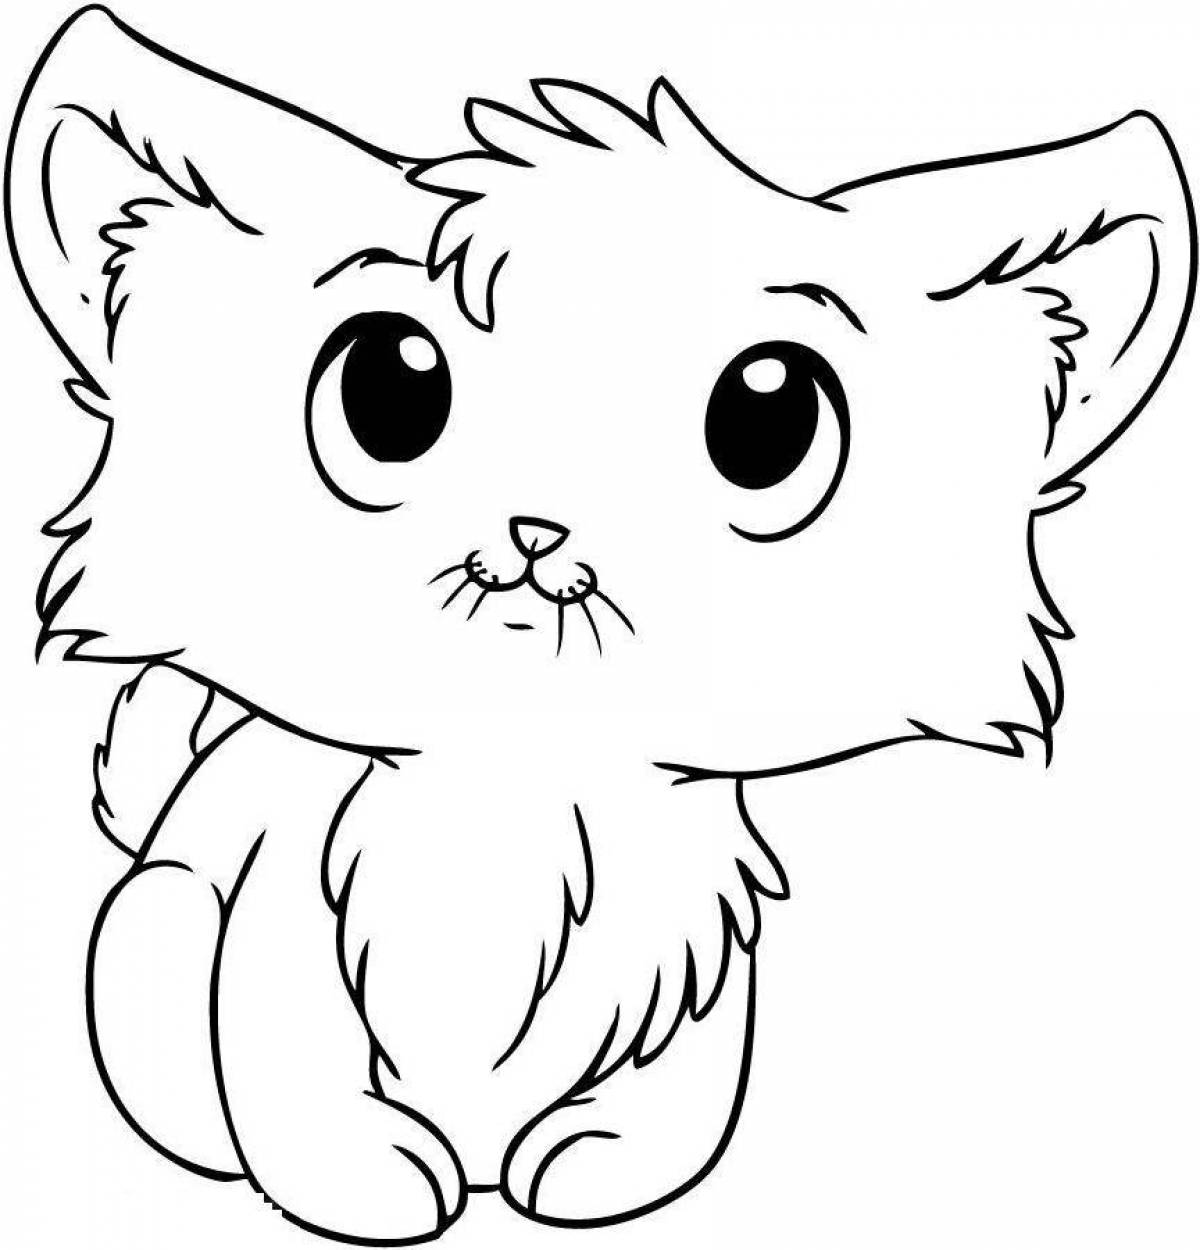 Cute and funny cat coloring book